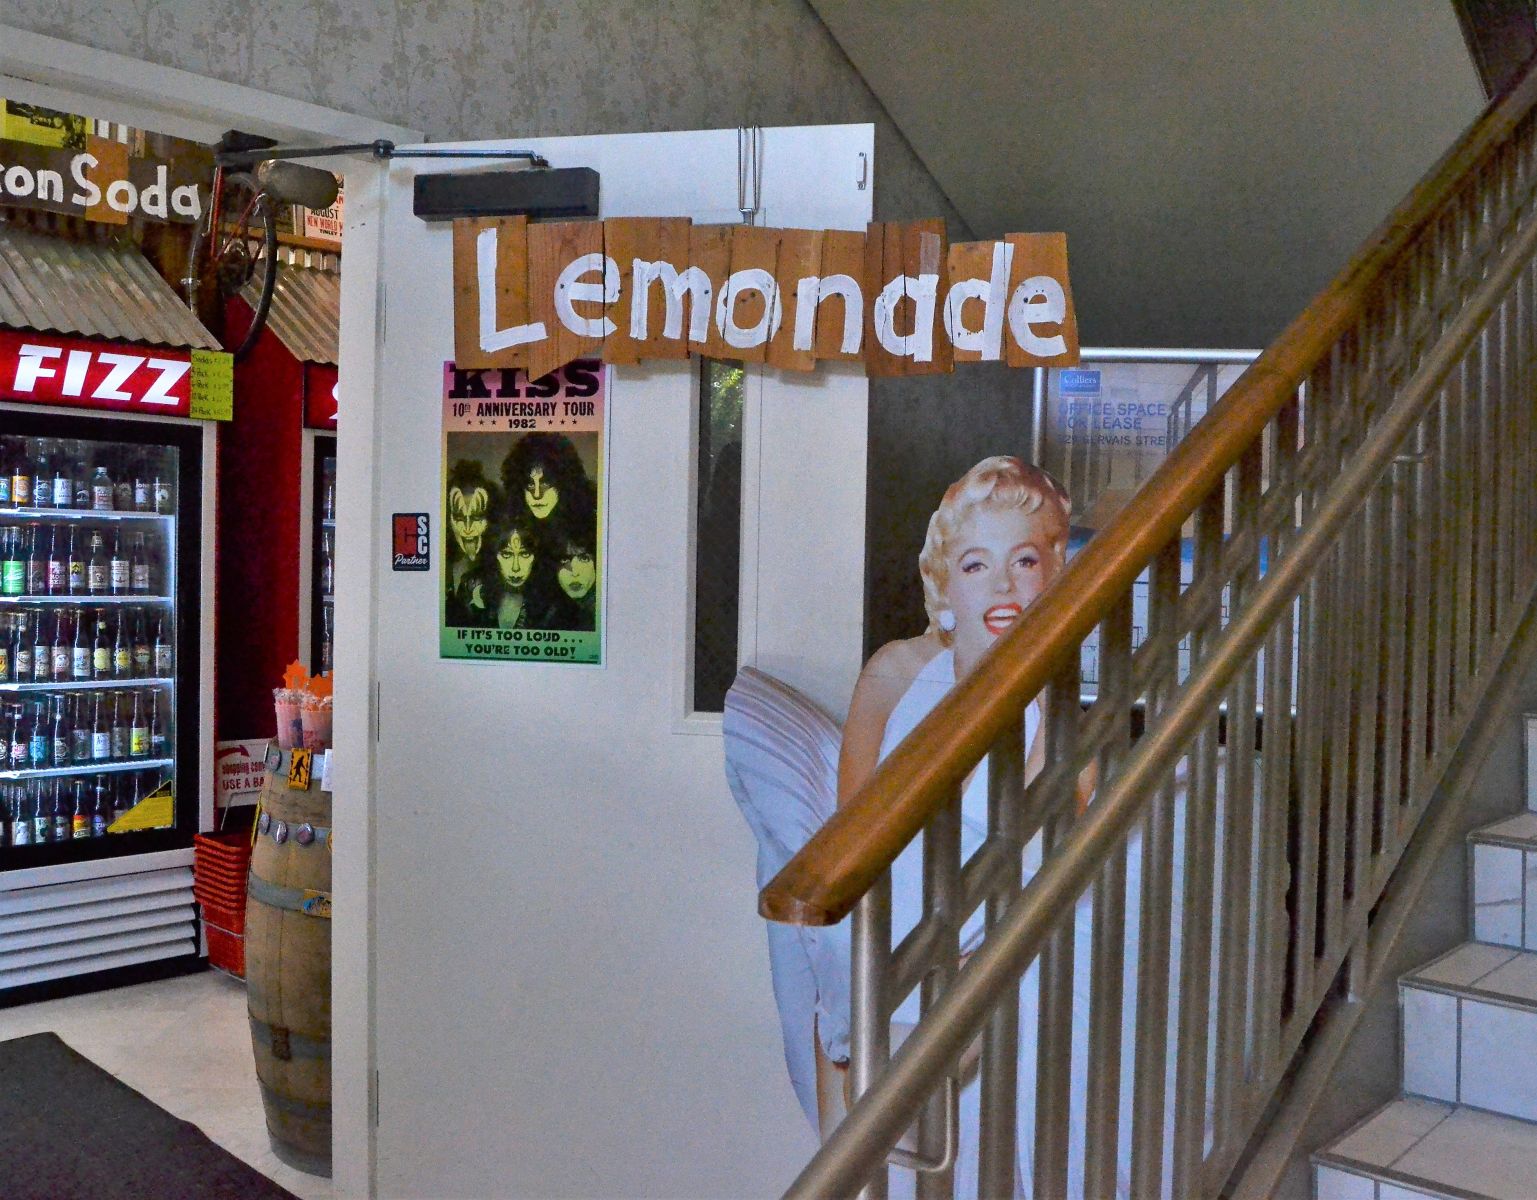 A cutout of Marilyn Monroe greets visitors to candy and soda shop Rocket Fizz. (Photo/Melinda Waldrop) 